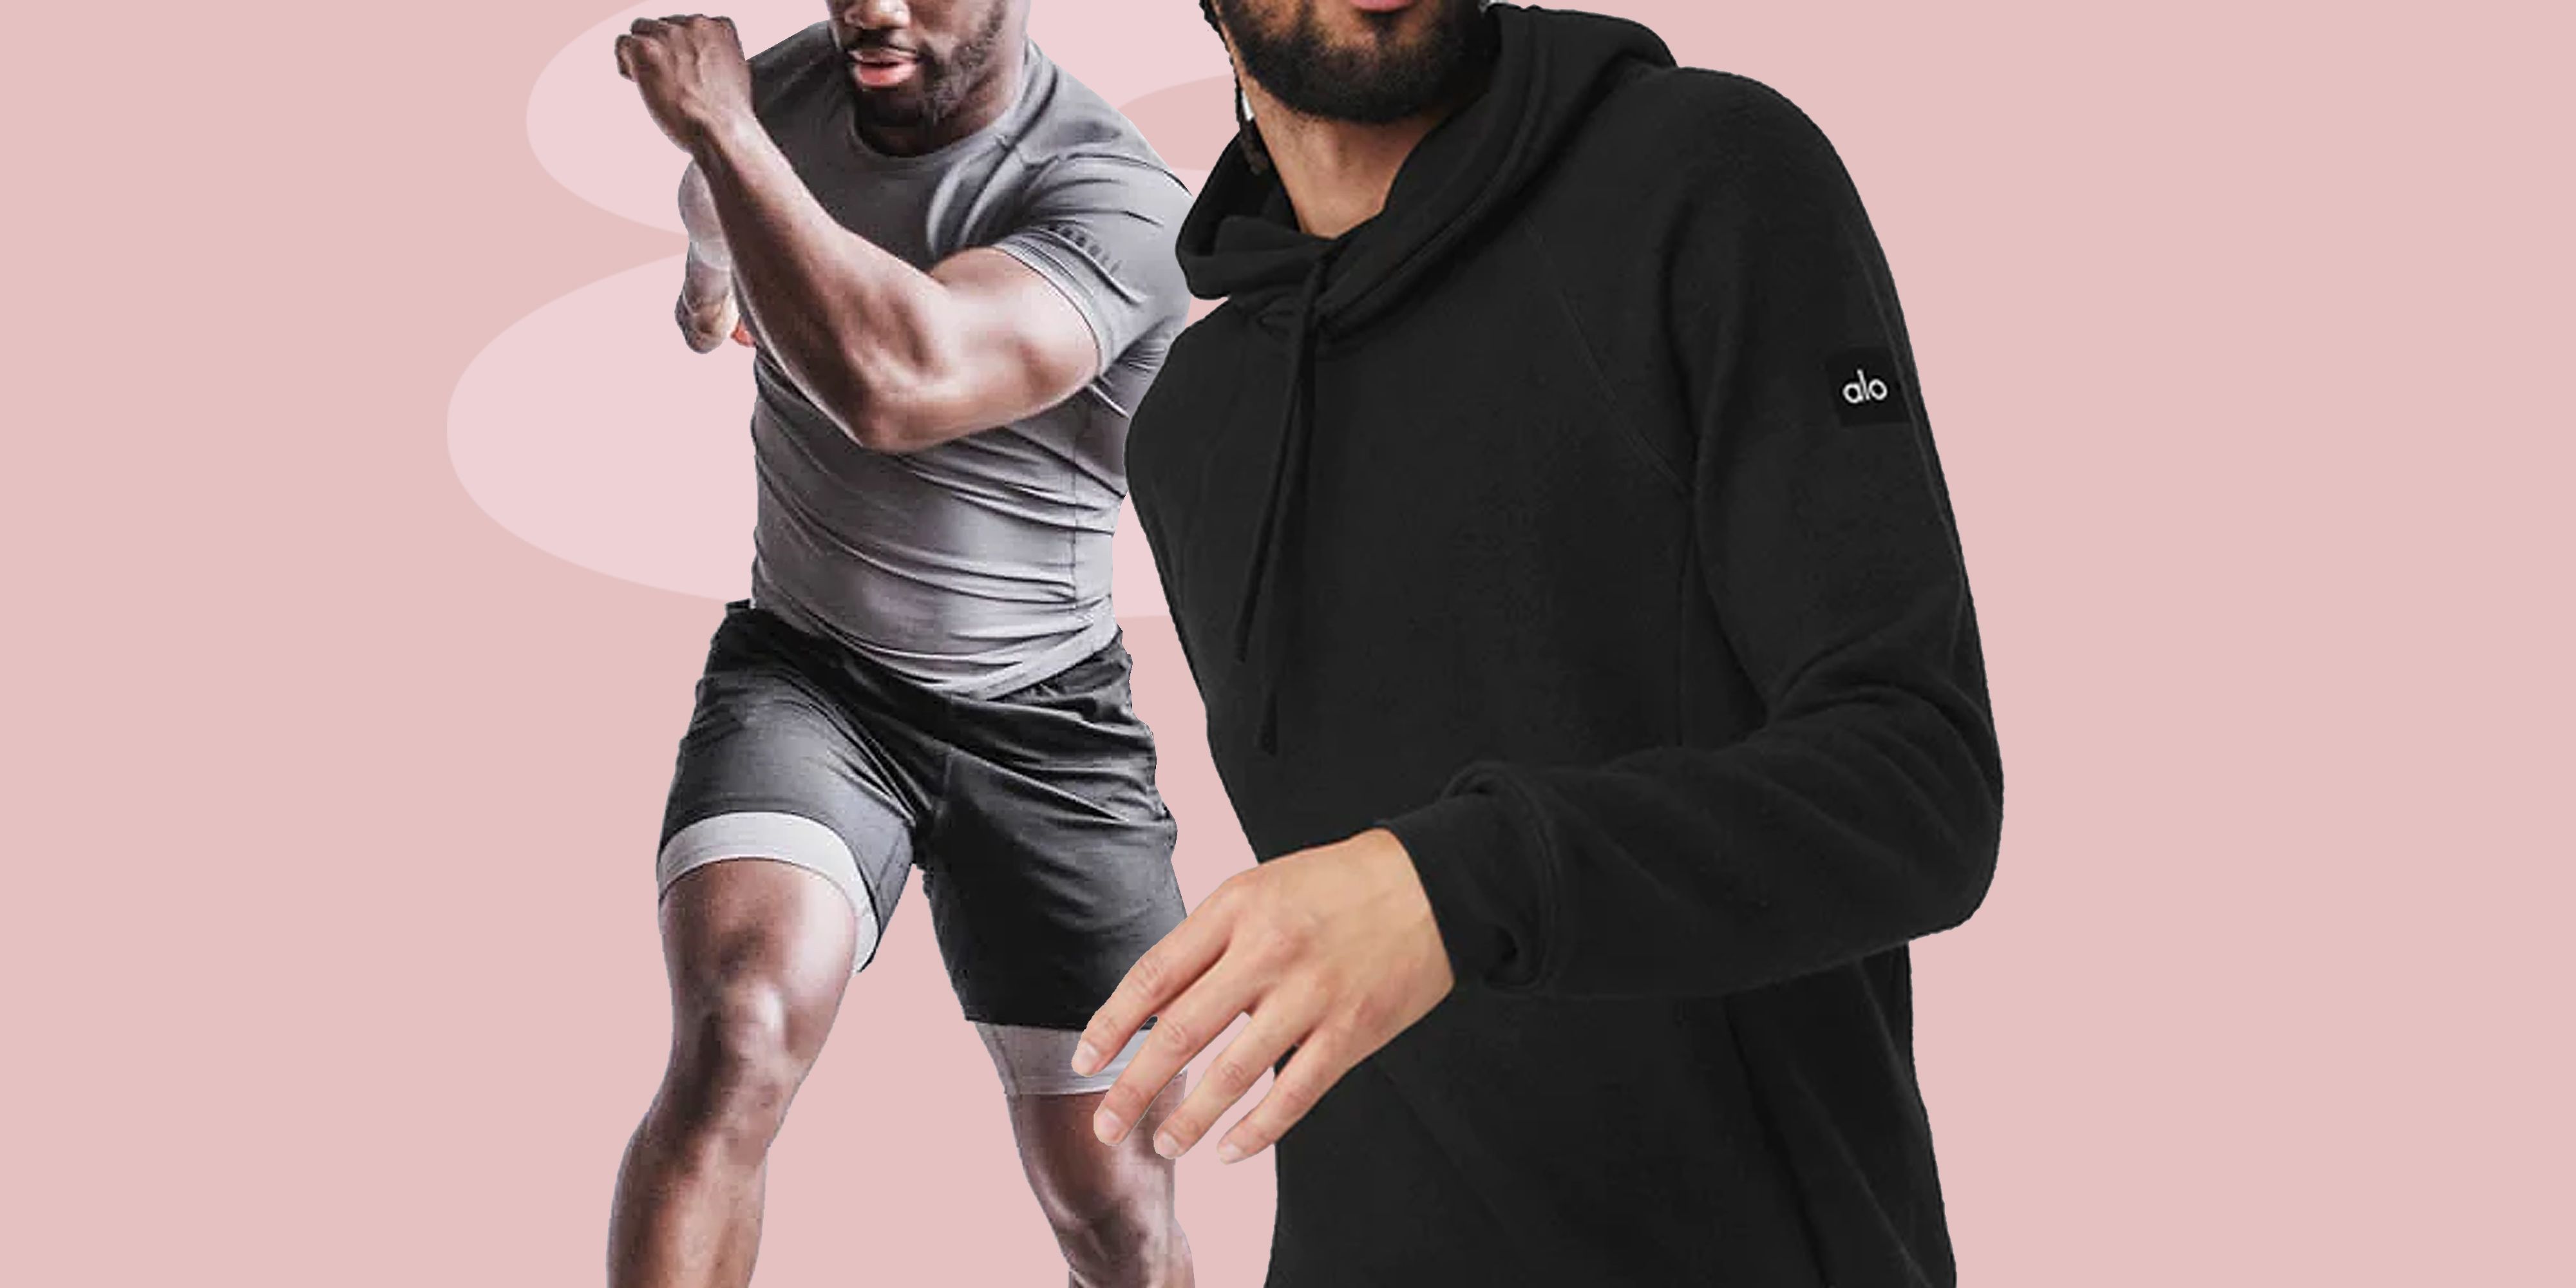 The 2022 GQ Fitness Awards: The Best Workout Clothes, Gear, Tech